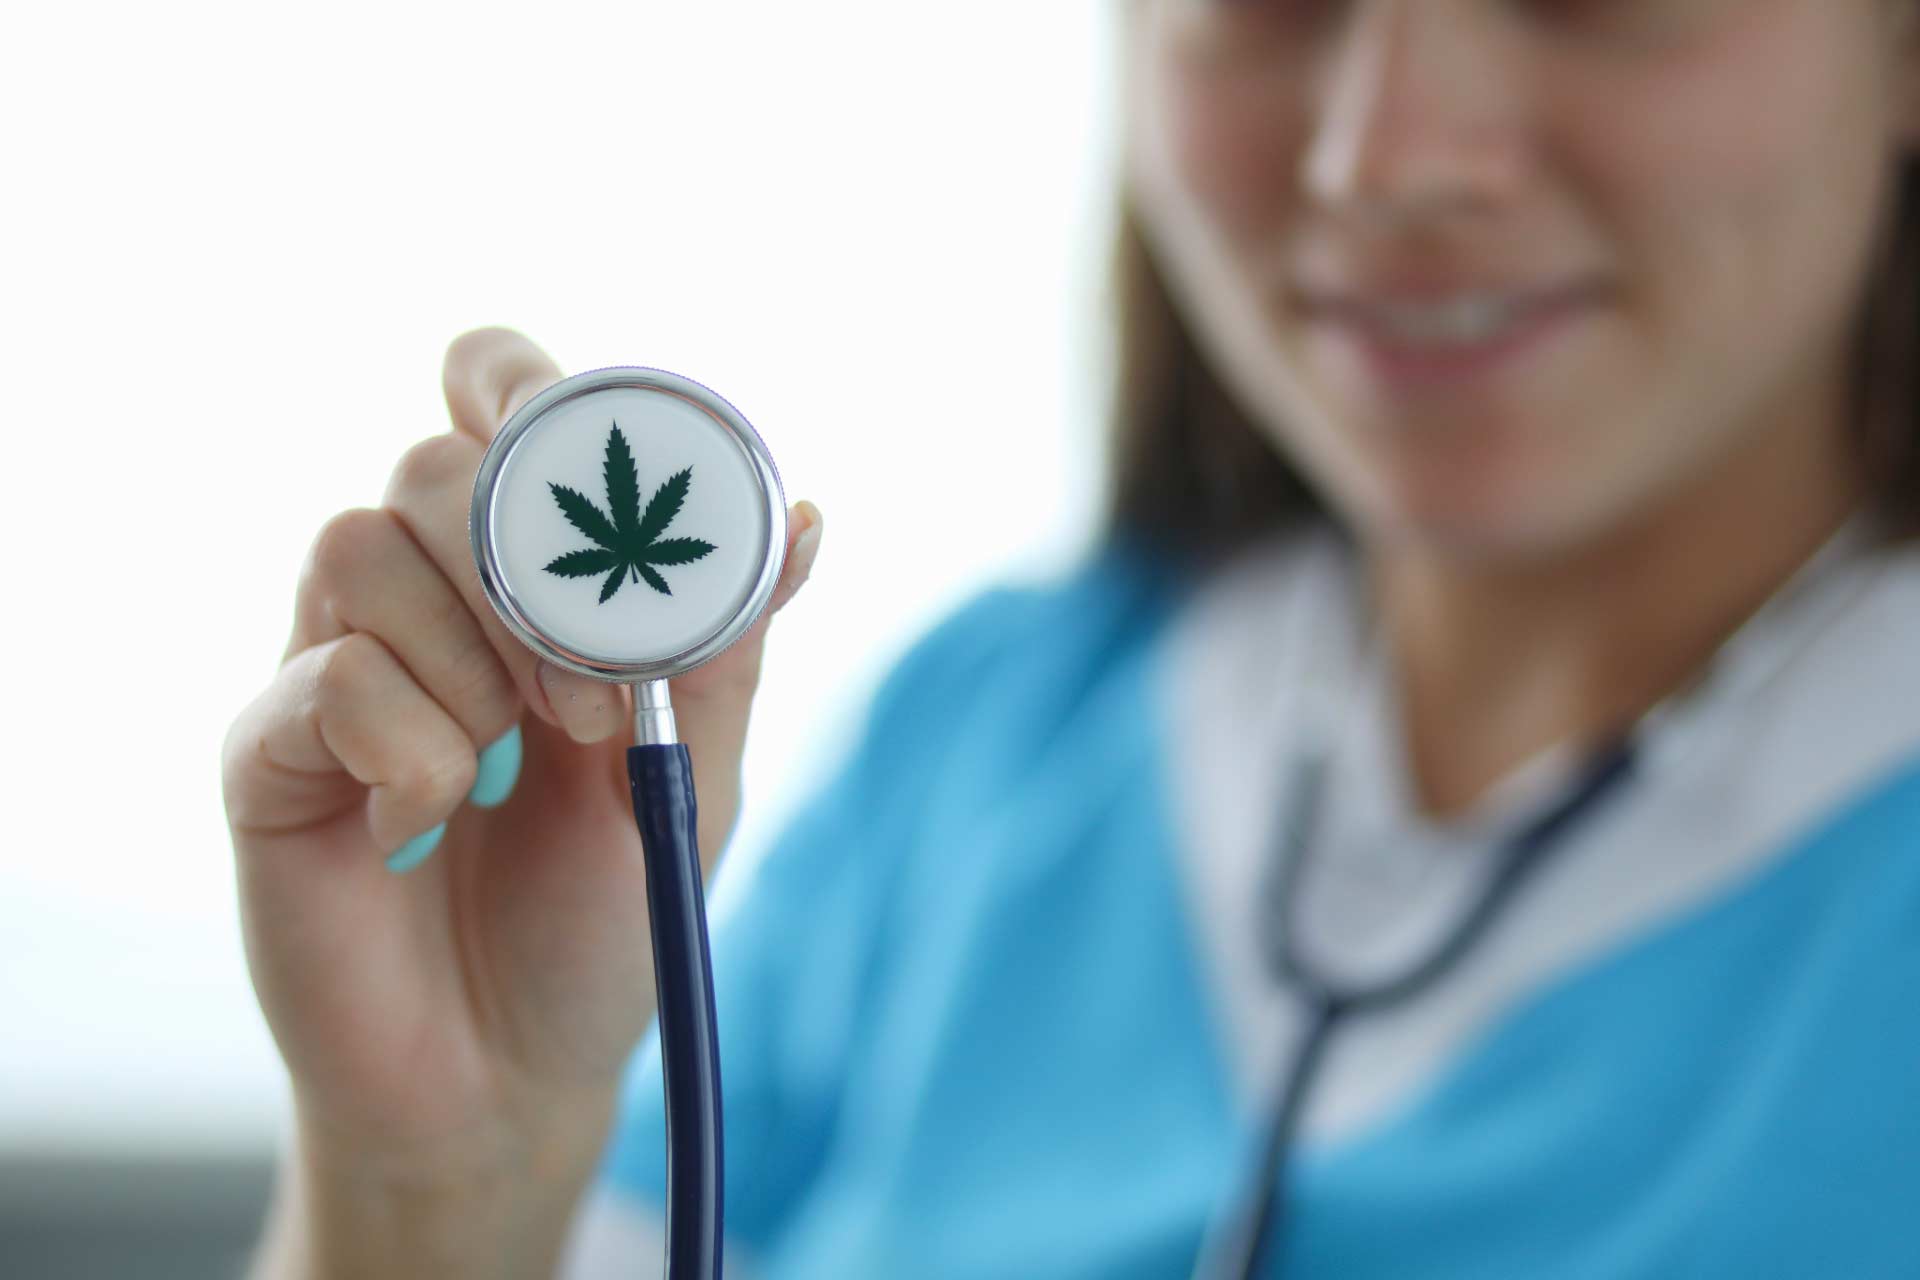 Smiling cannabis nurse in background, holding up stethoscope with a marijuana leaf image printed on it.